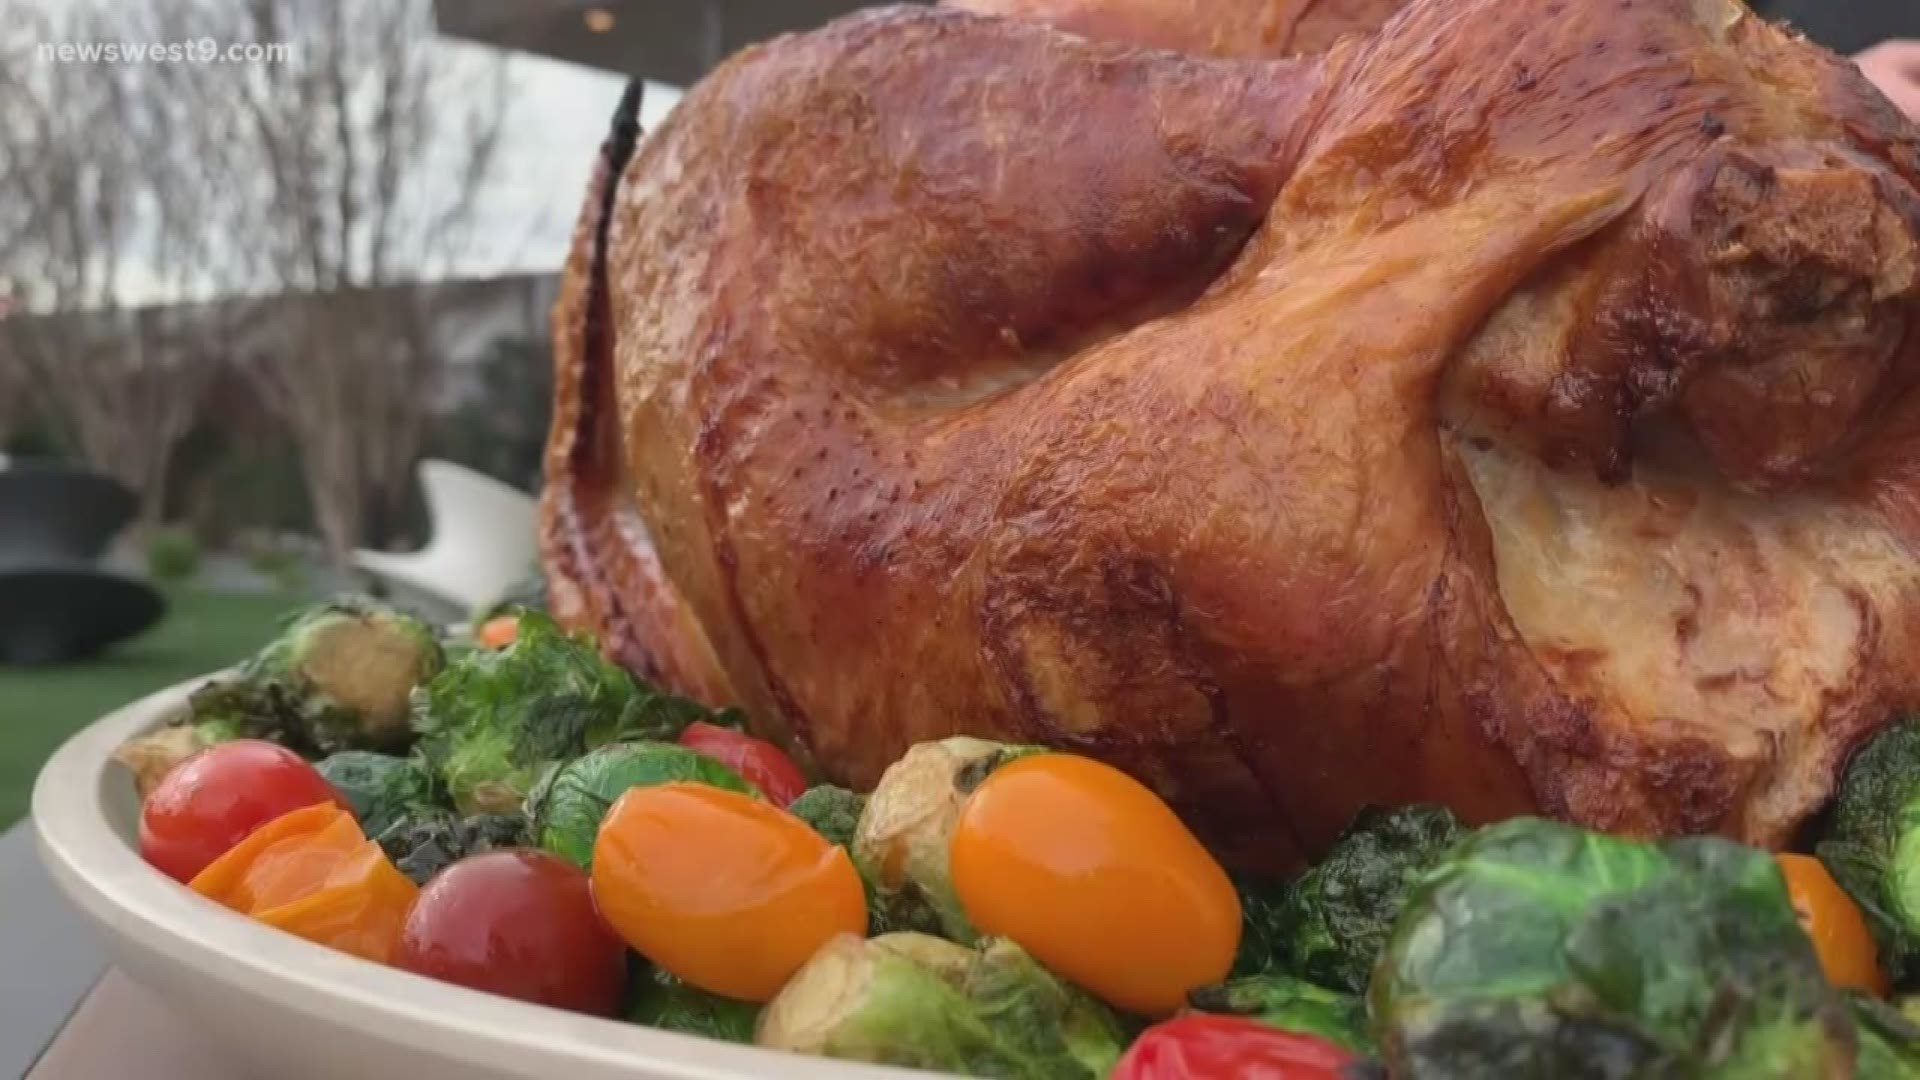 Barrel and Derrick restaurant in the Odessa Marriott will be serving Thanksgiving dishes today